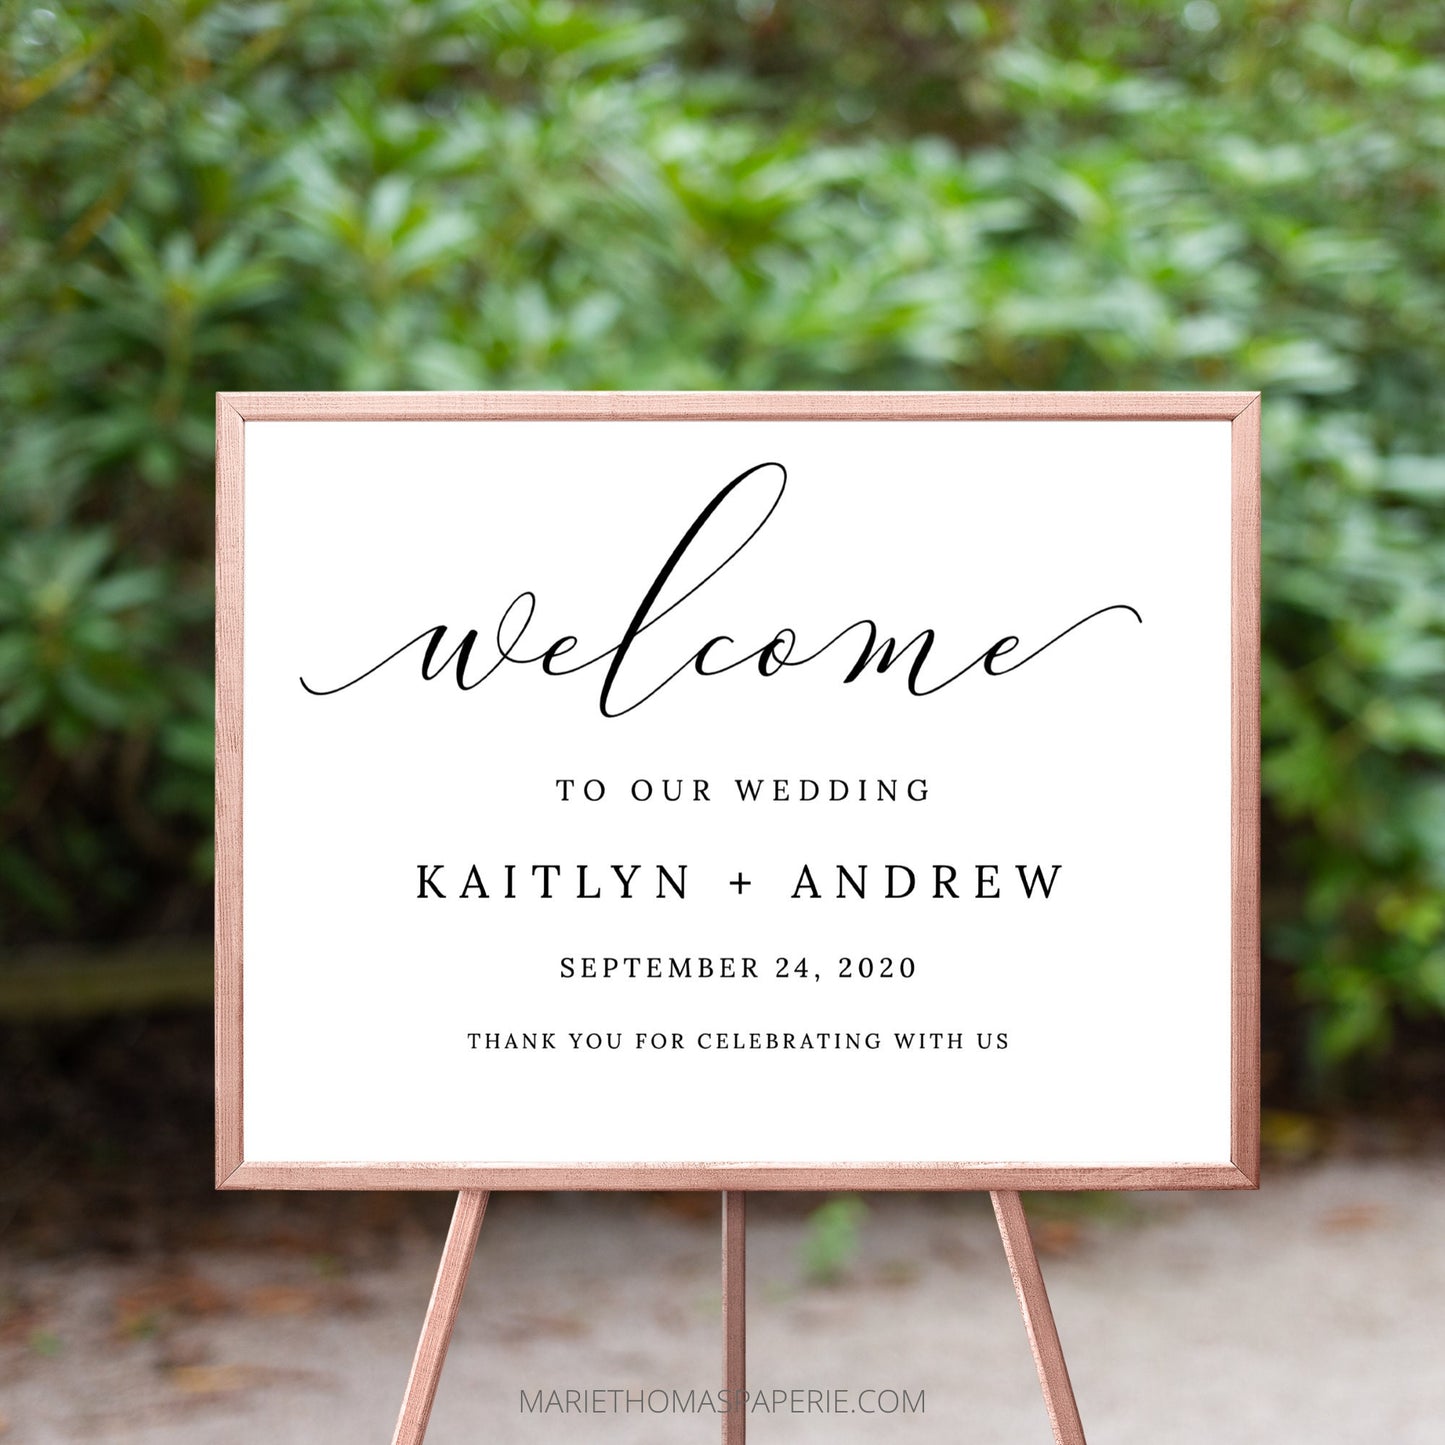 Editable Wedding Welcome Sign Welcome to our Wedding Sign Modern Minimalist Black & White Poster Template